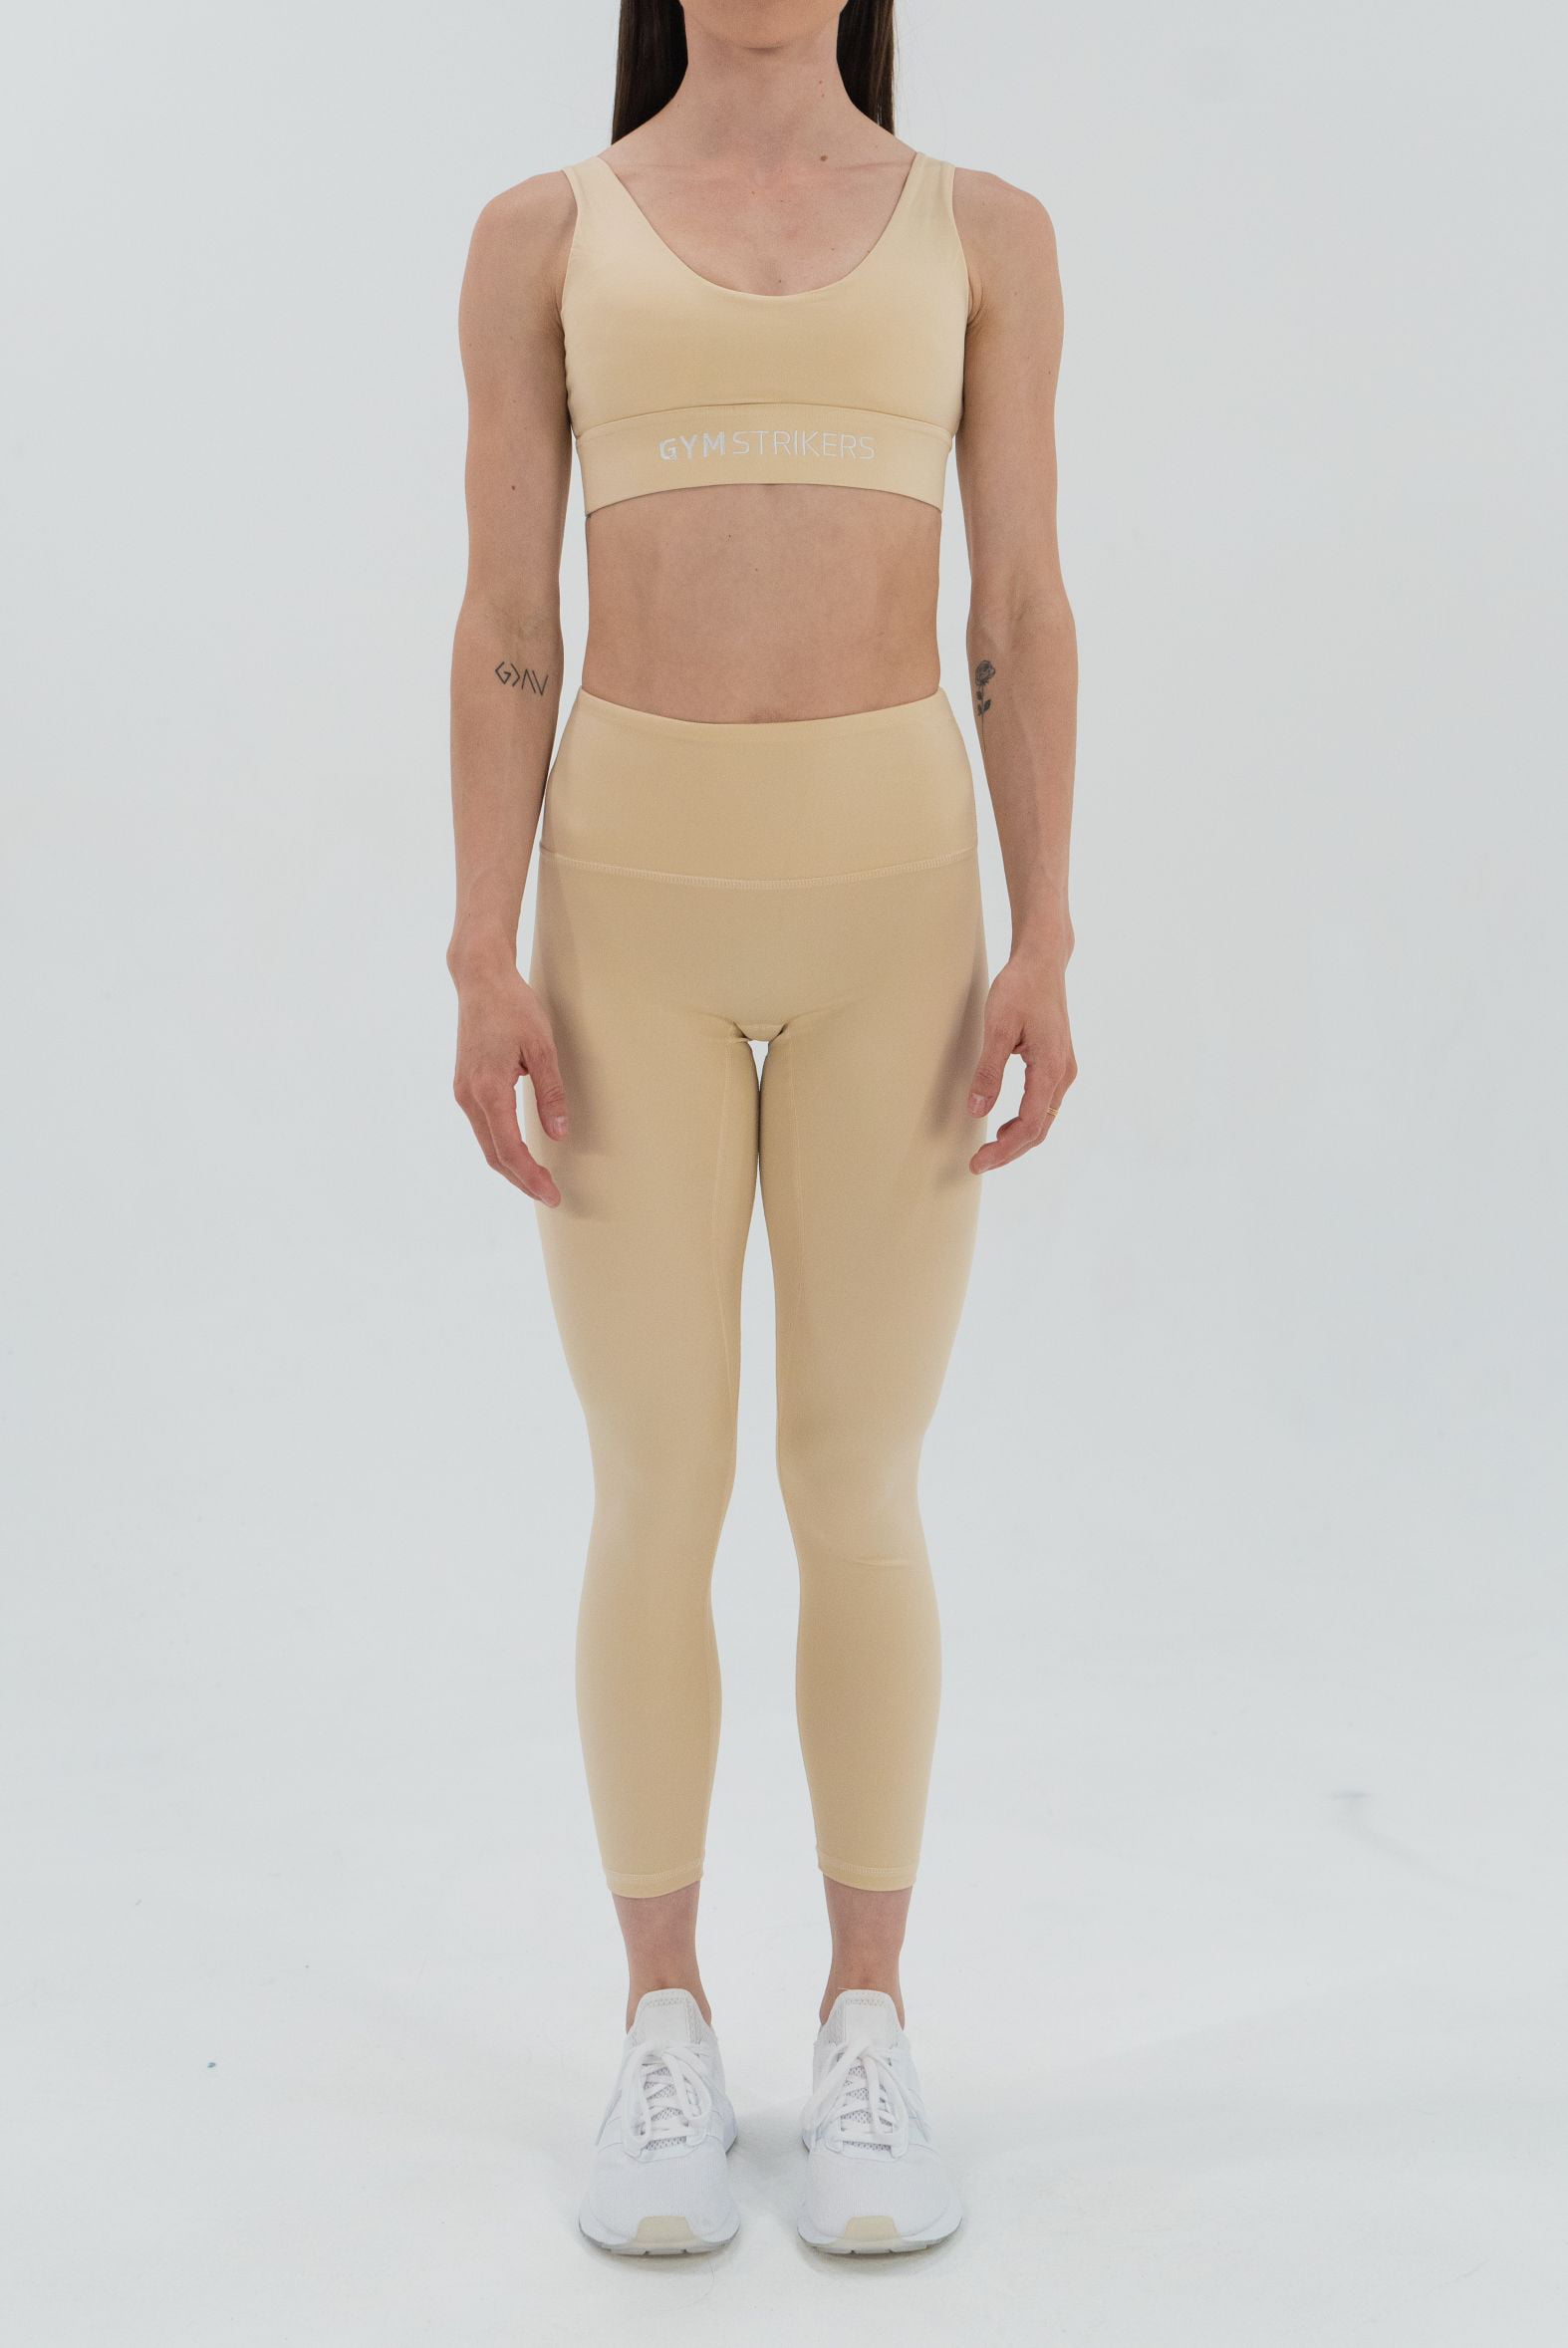 Level Up Sports Bra and Leggings Set - Nude